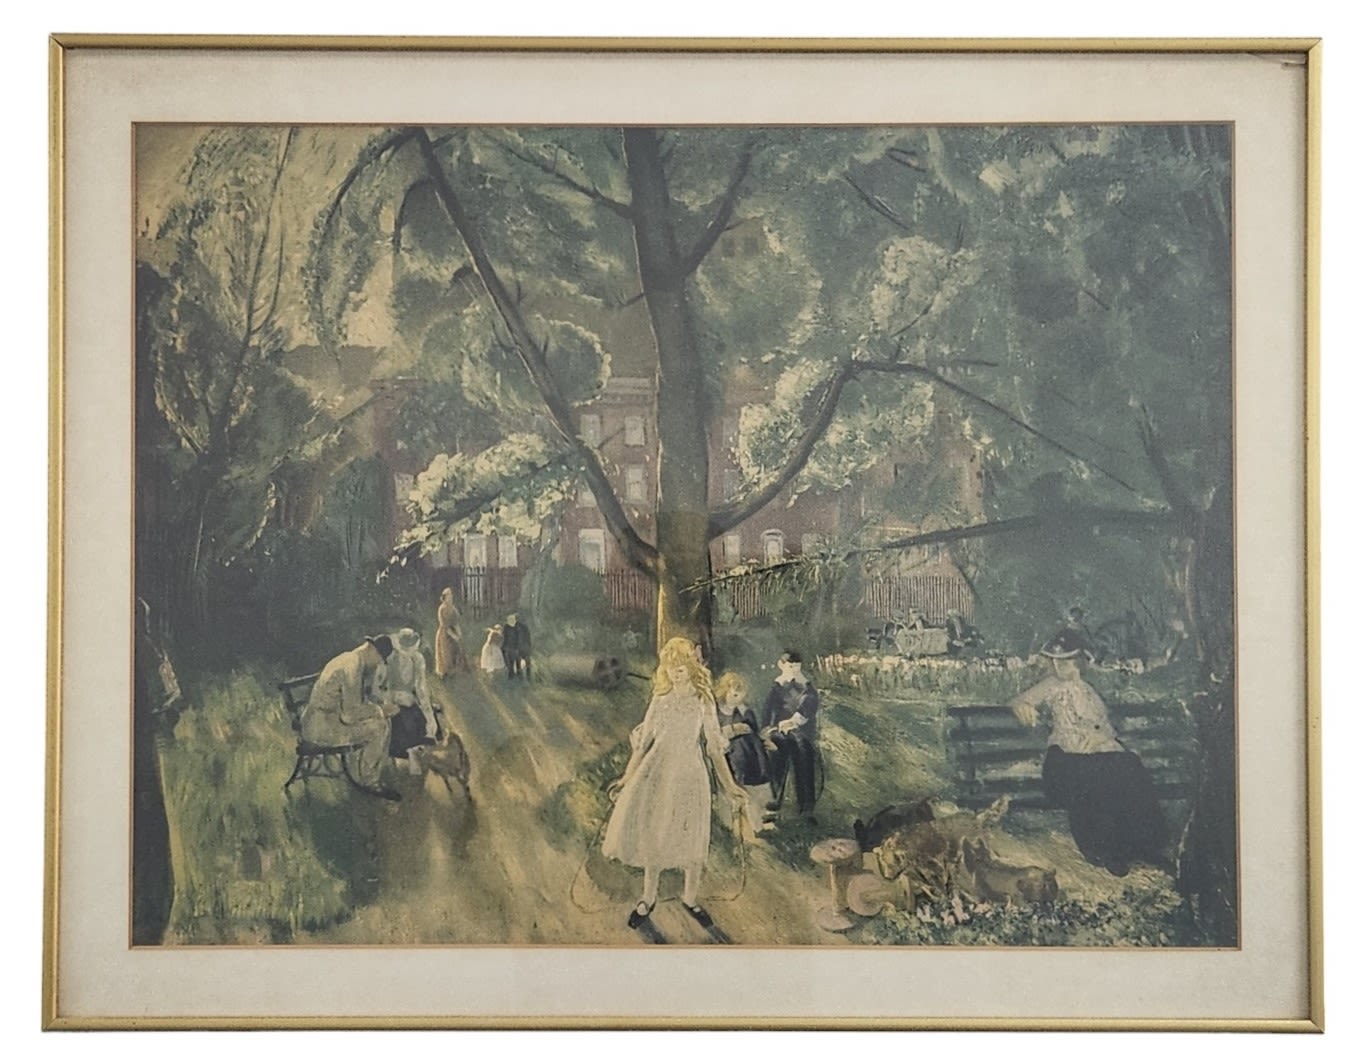 'Grammersea Park' - painting, george Bellows (USA, 1882 – 1925 George Bellows) - 'Gramercy Park' - - Image 2 of 3